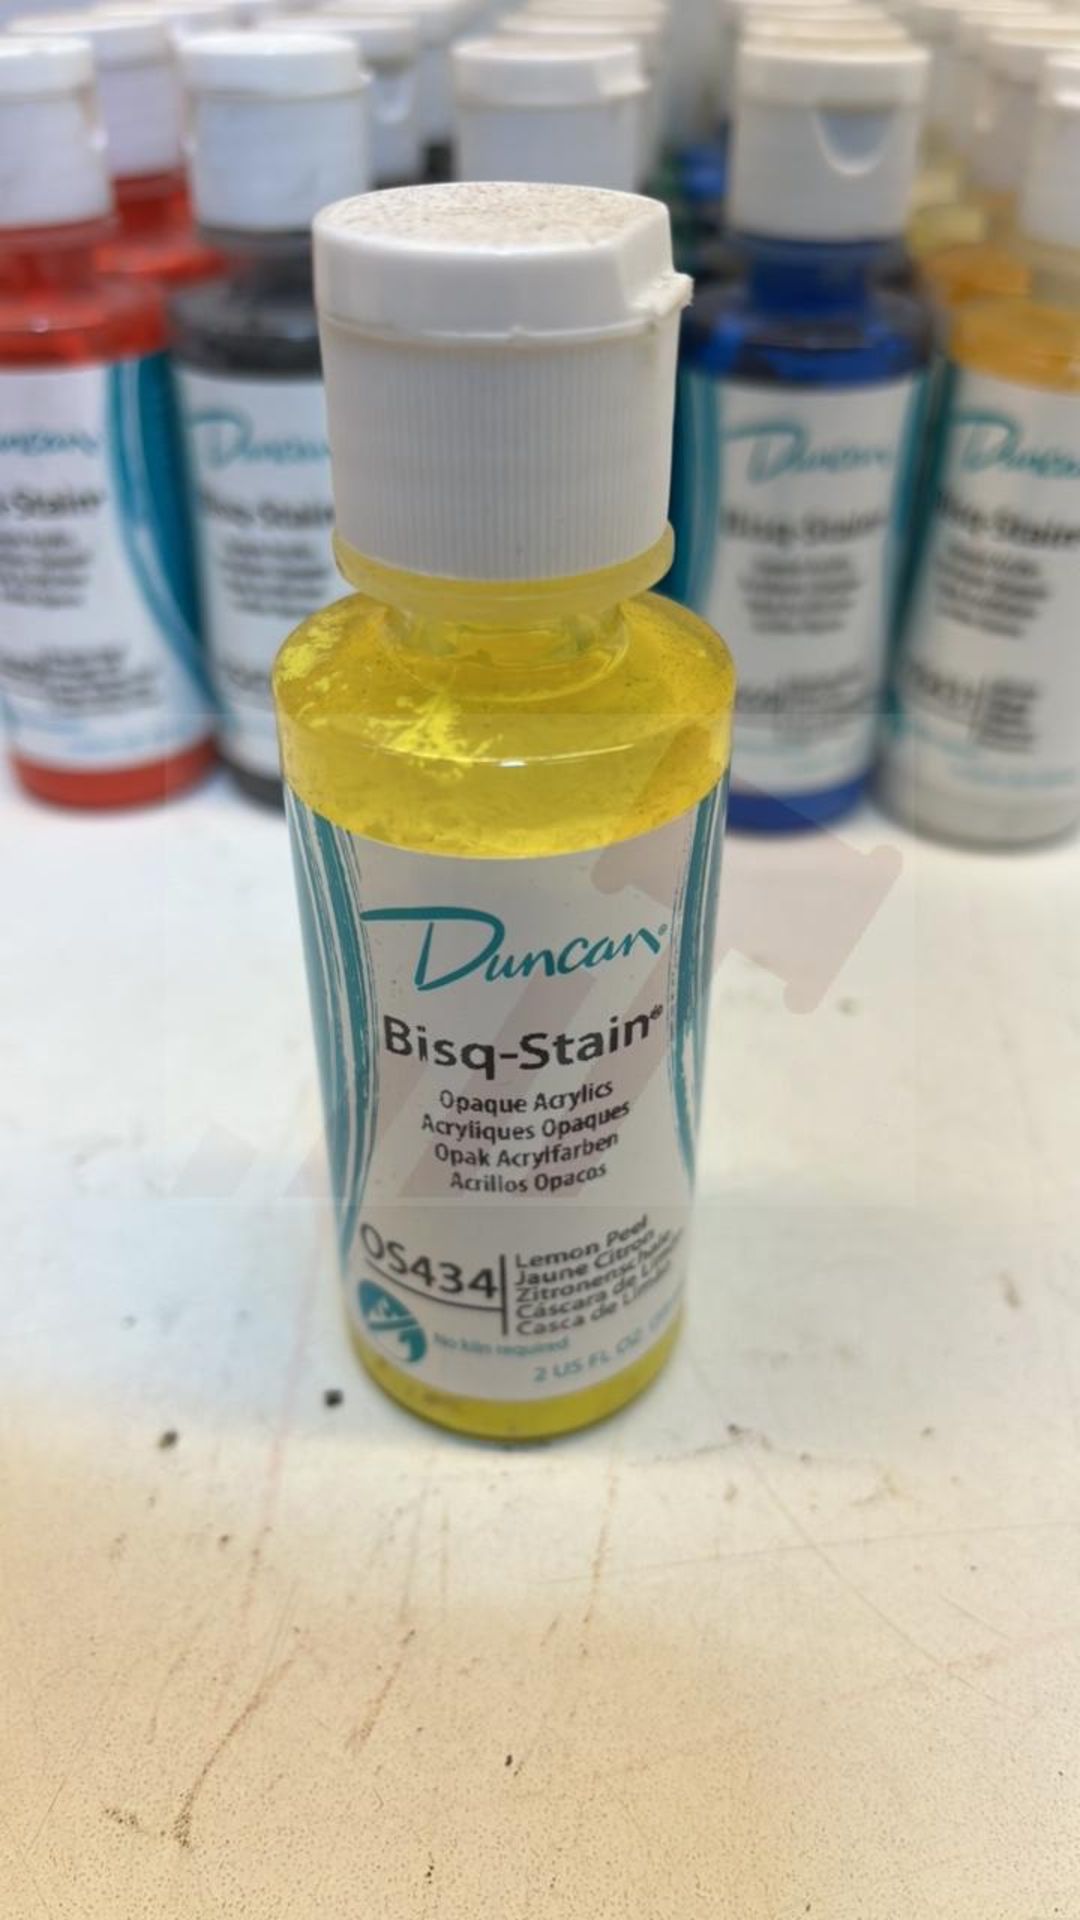 30 x Duncan Bisq-Stain 59ML Bottles Of Acrylic Paints - Image 7 of 7